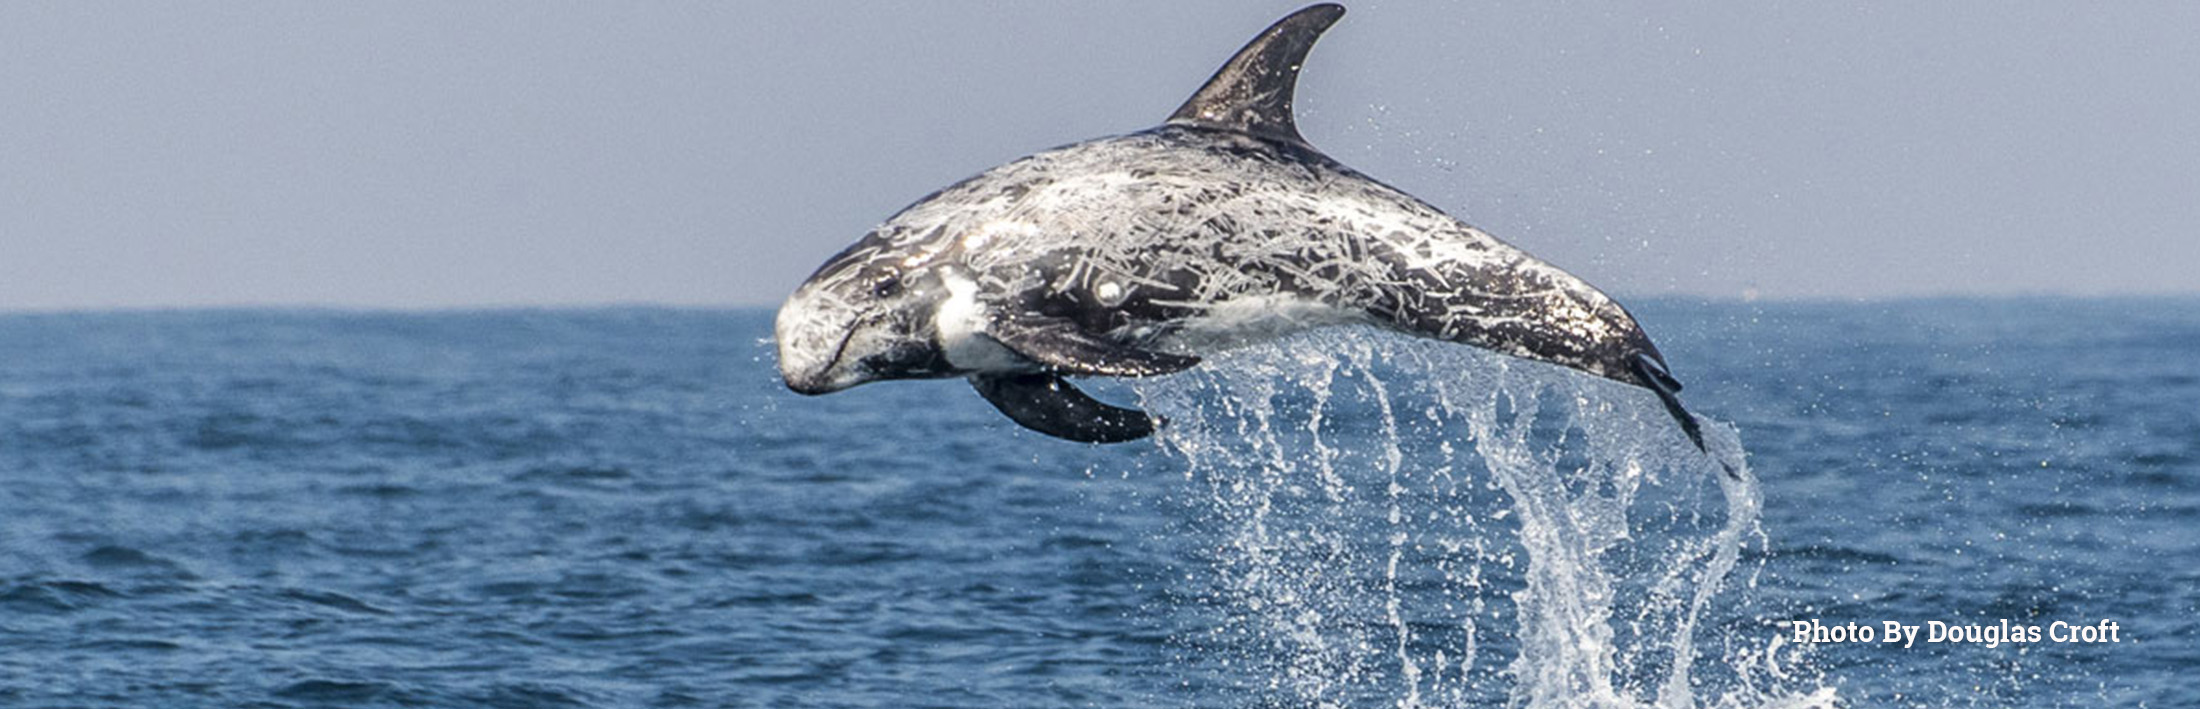 Honorable Mention Risso's Dolphin, Monterey Bay, by Douglas Croft